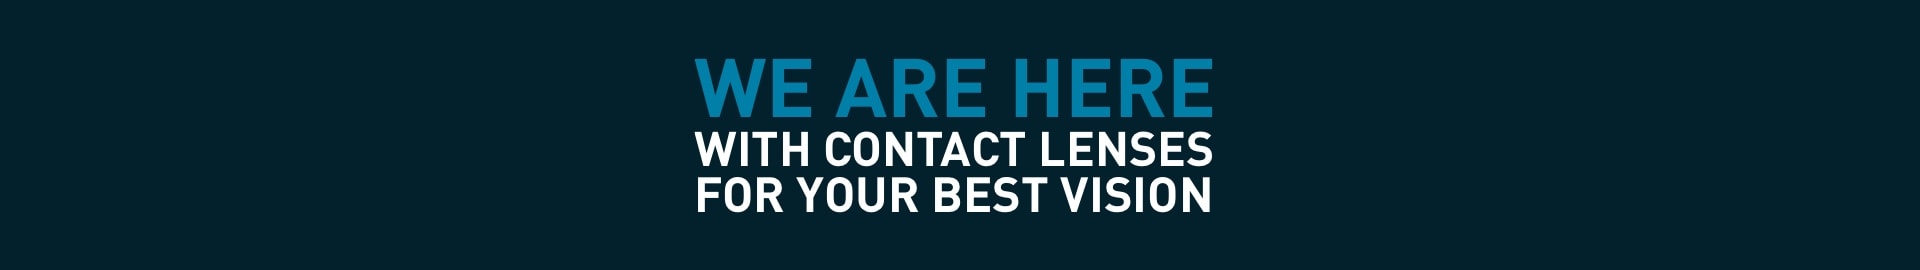 we are here, with contact lenses for your best vision